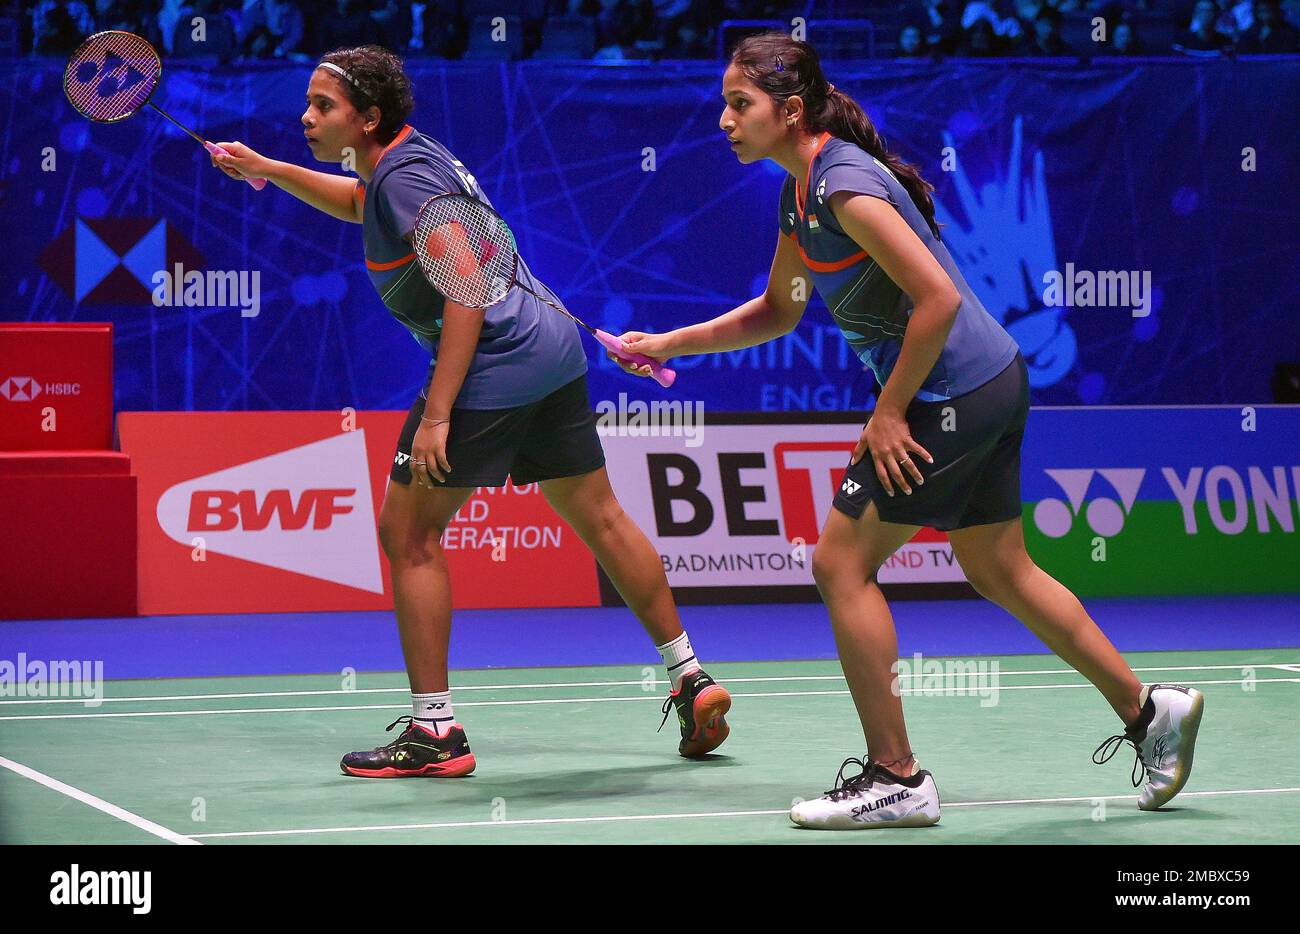 Indias Treesa Jolly and Gayatri Gopichand Pullella, right, compete against Chinas Zhang Shu Xian and Zhen Yu during the womens doubles semi final match at the All England Open Badminton Championships in